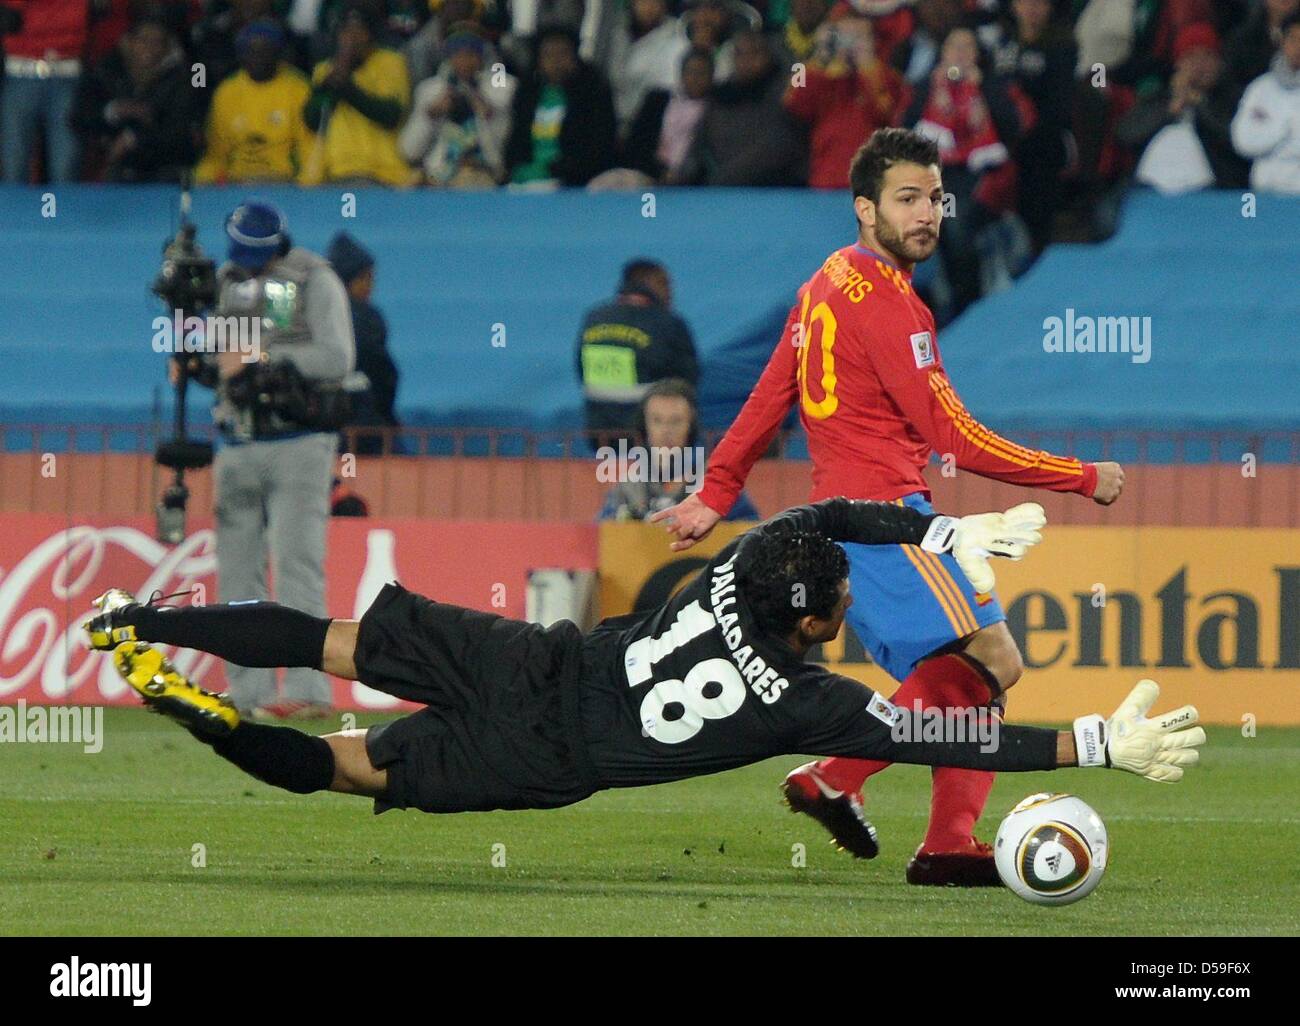 Cesc Fabregas (R) of Spain tries to score against goalkeeper Noel Valladares during the FIFA World Cup 2010 group H match between Spain and Honduras at the Ellis Park Stadium in Johannesburg, South Africa 21 June 2010. Photo: - Please refer to http://dpaq.de/FIFA-WM2010-TC  +++(c) dpa - Bildfunk+++ Stock Photo